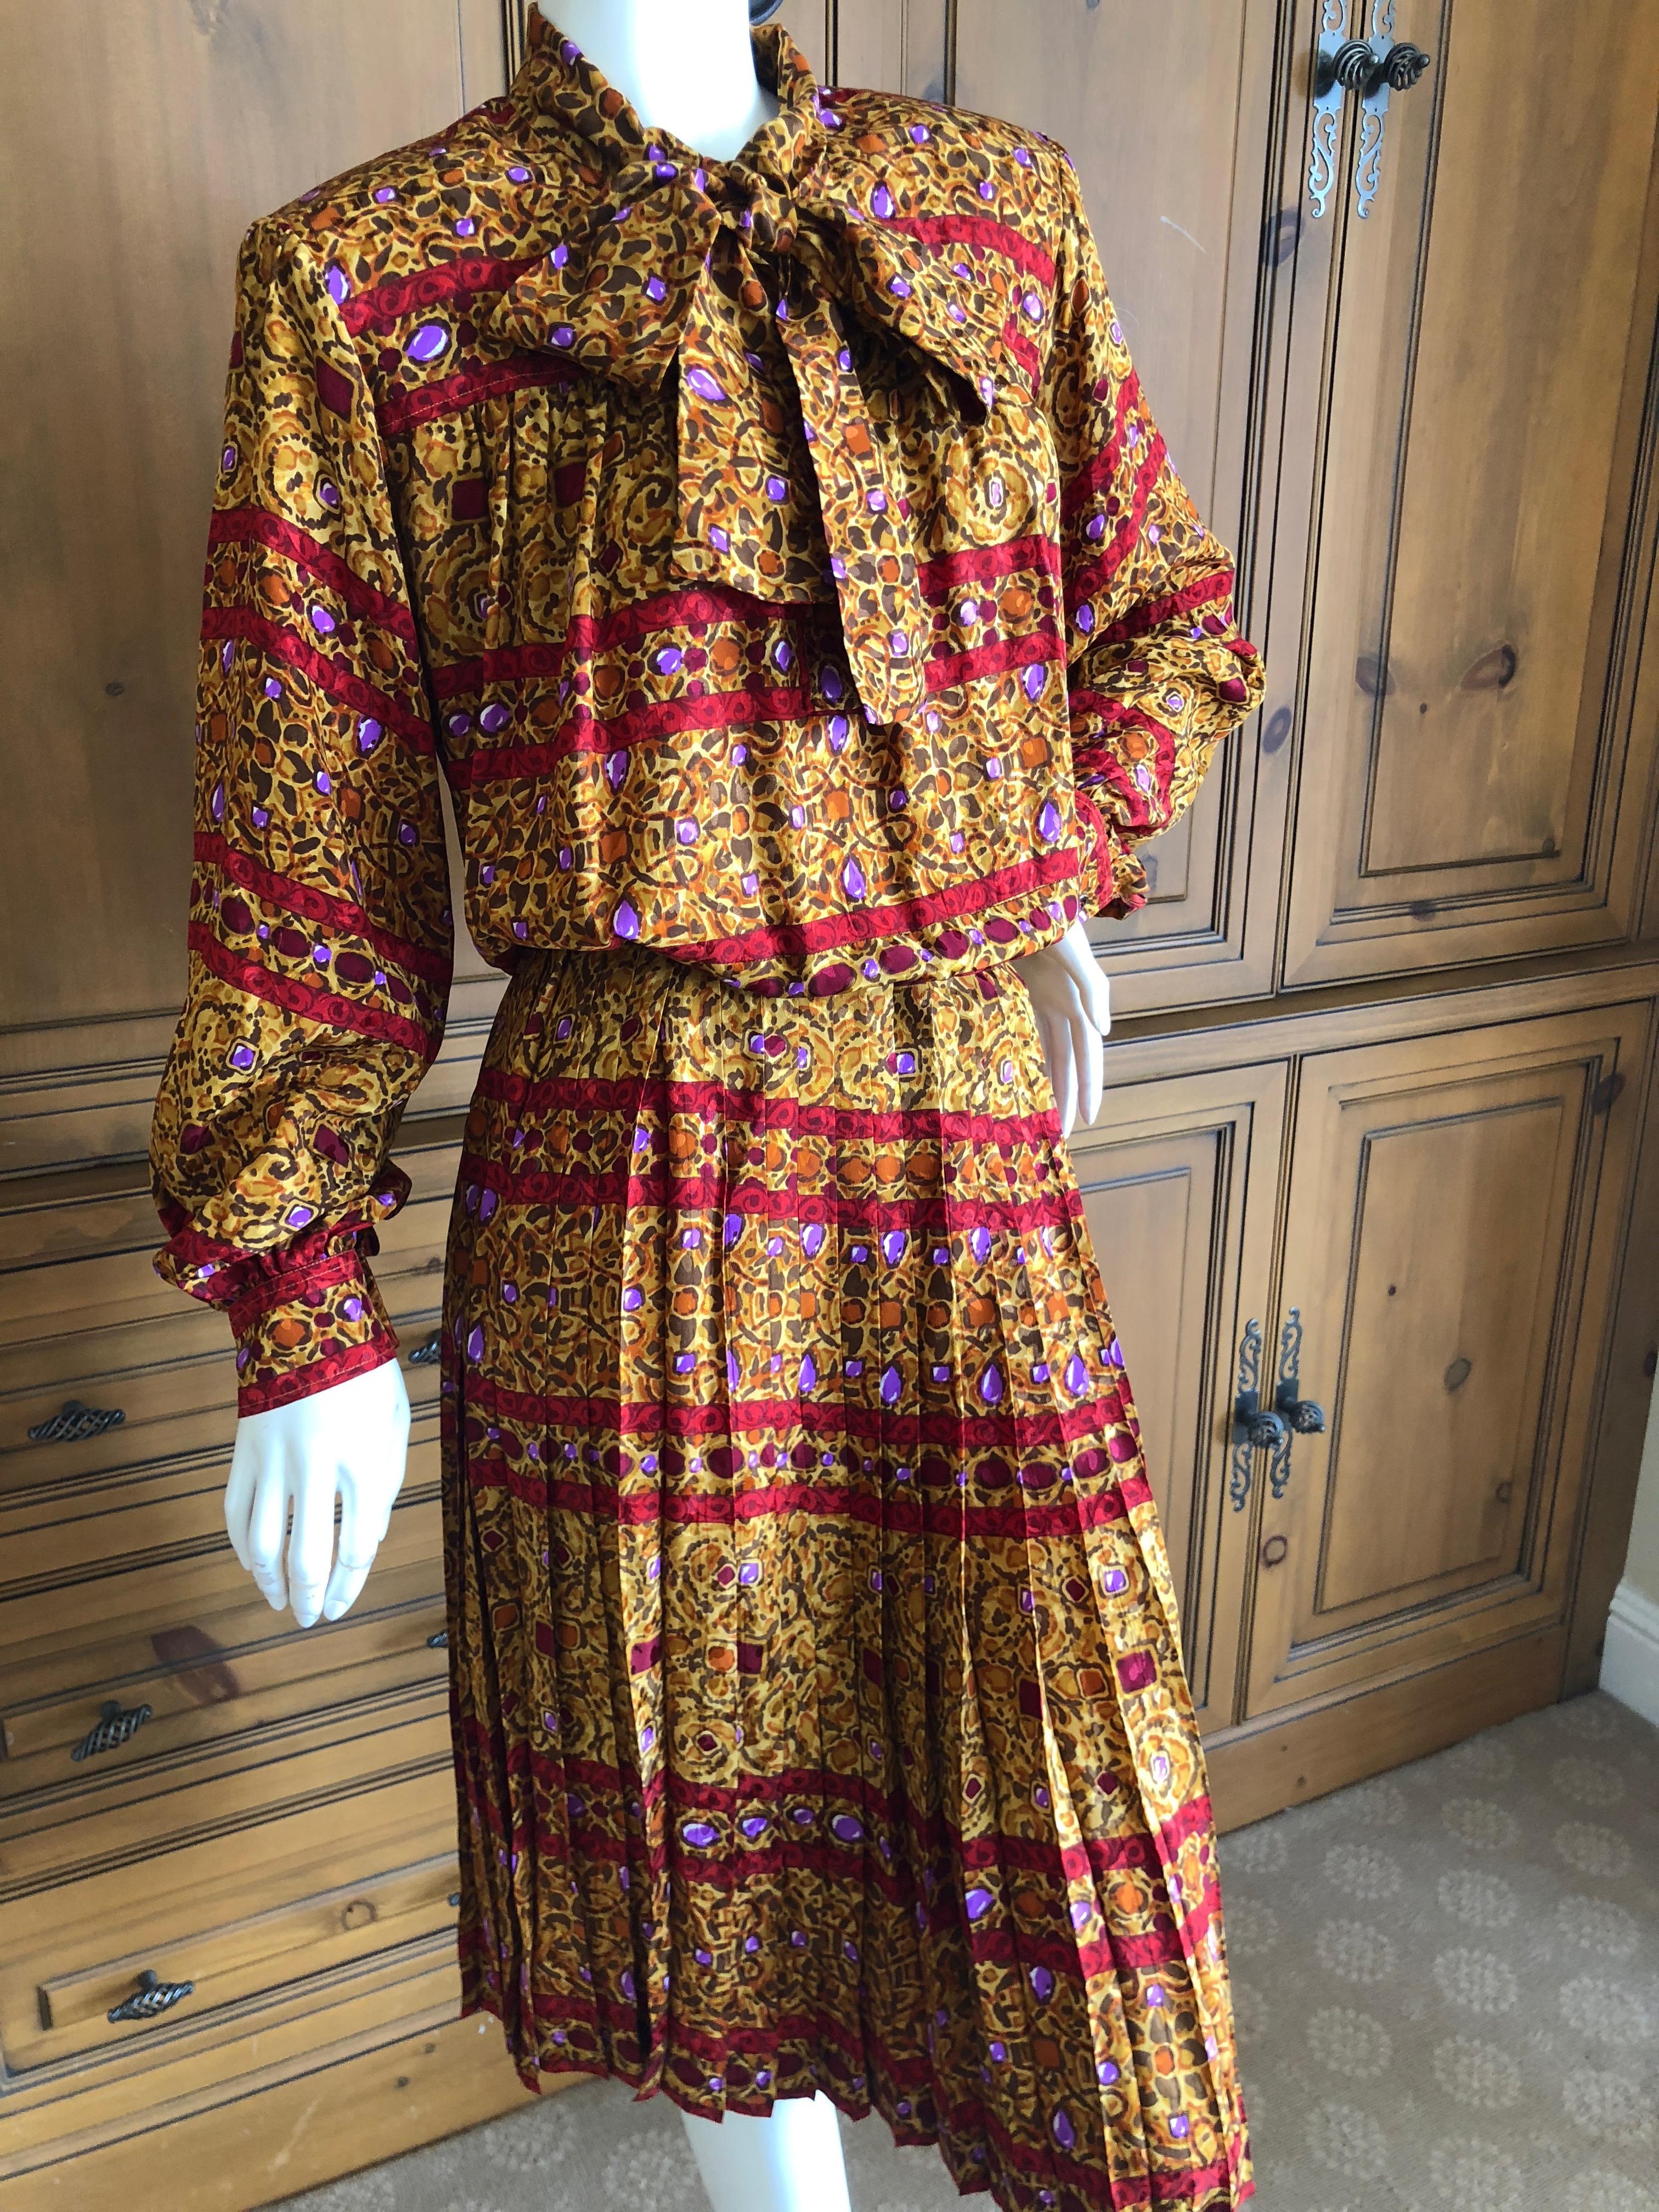 Yves Saint Laurent Rive Gauche 70's Silk Dress with Pussy Bows
So delightfully French. 
Size 44 but runs large
Bust 48